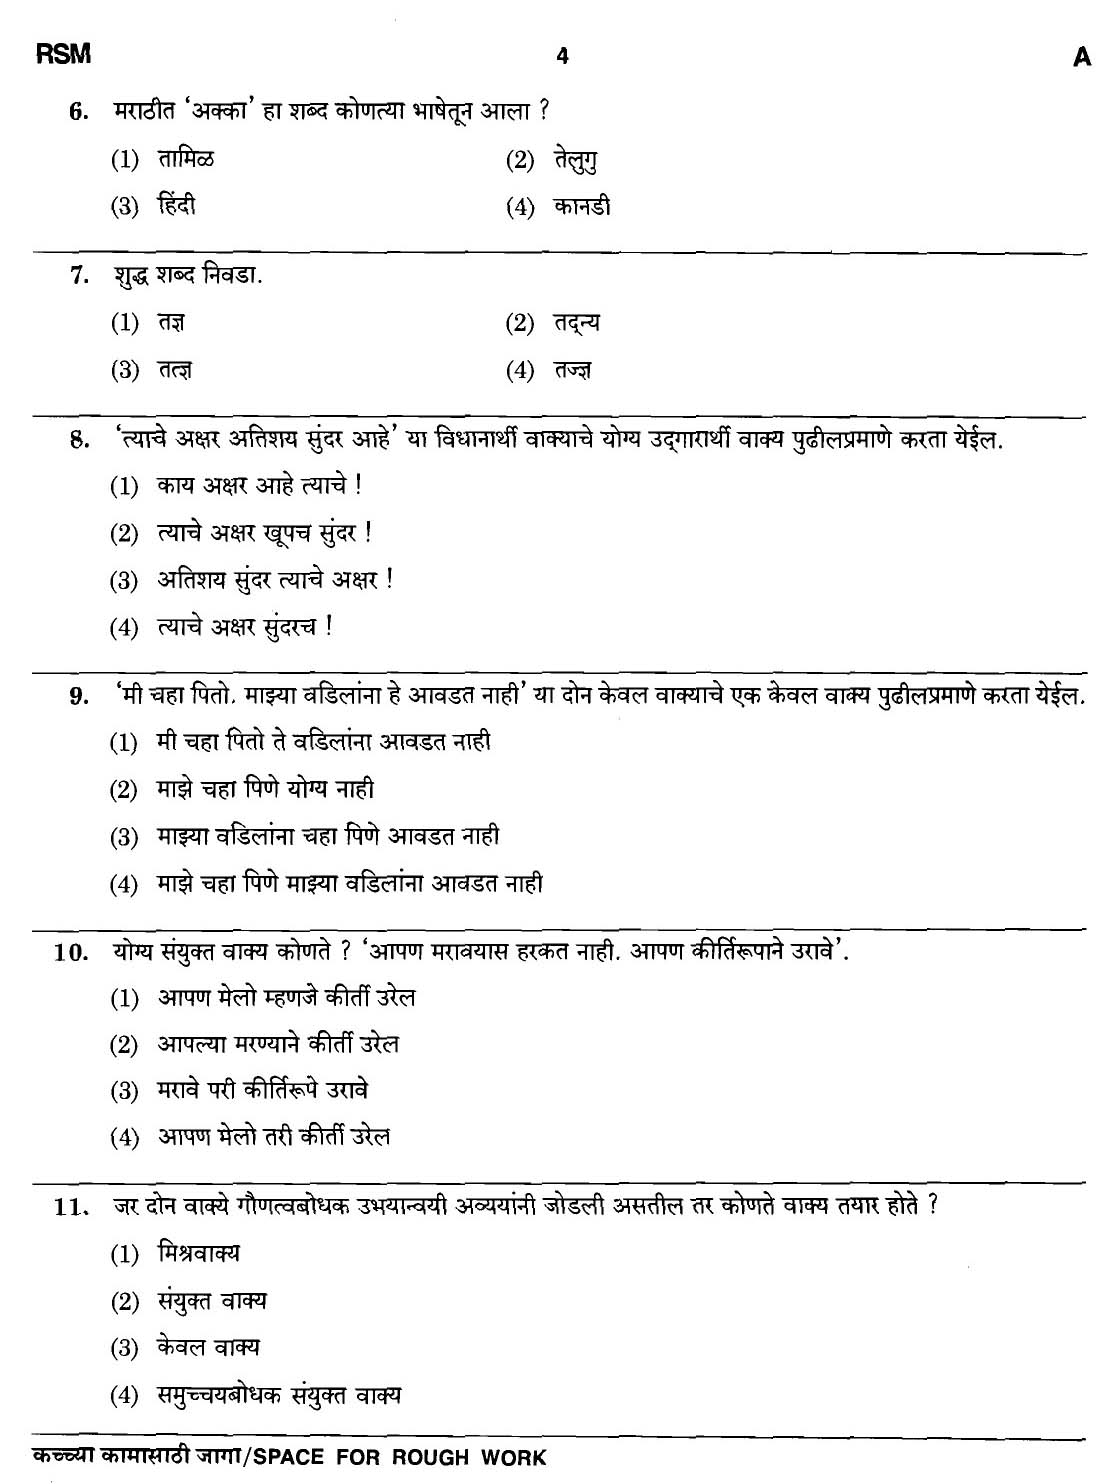 MPSC Agricultural Services Preliminary Exam 2011 Question Paper 3